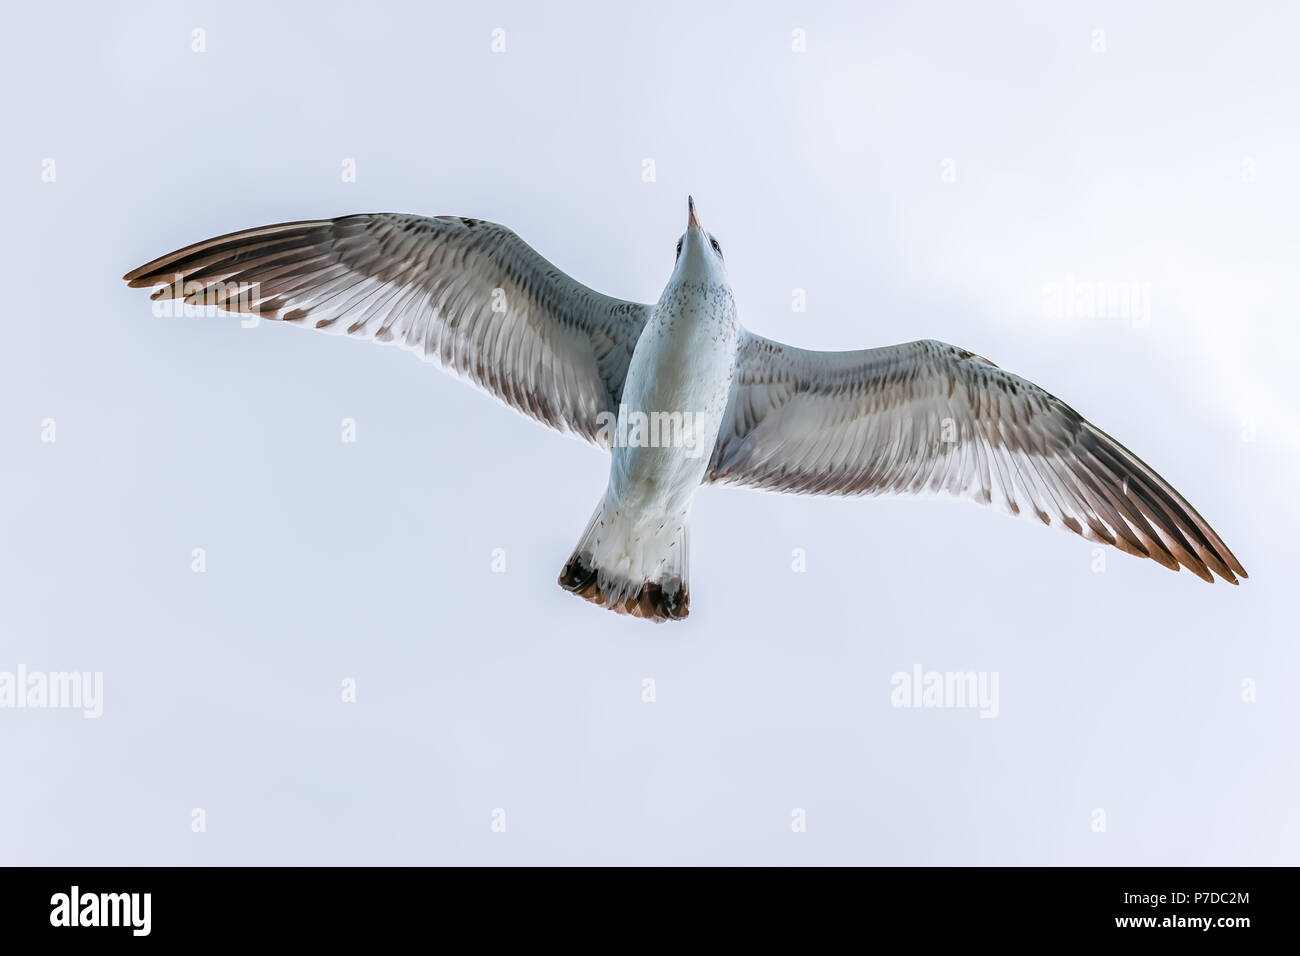 Cory's Shearwater bird gliding through the open skies off the east coast of North America. Stock Photo